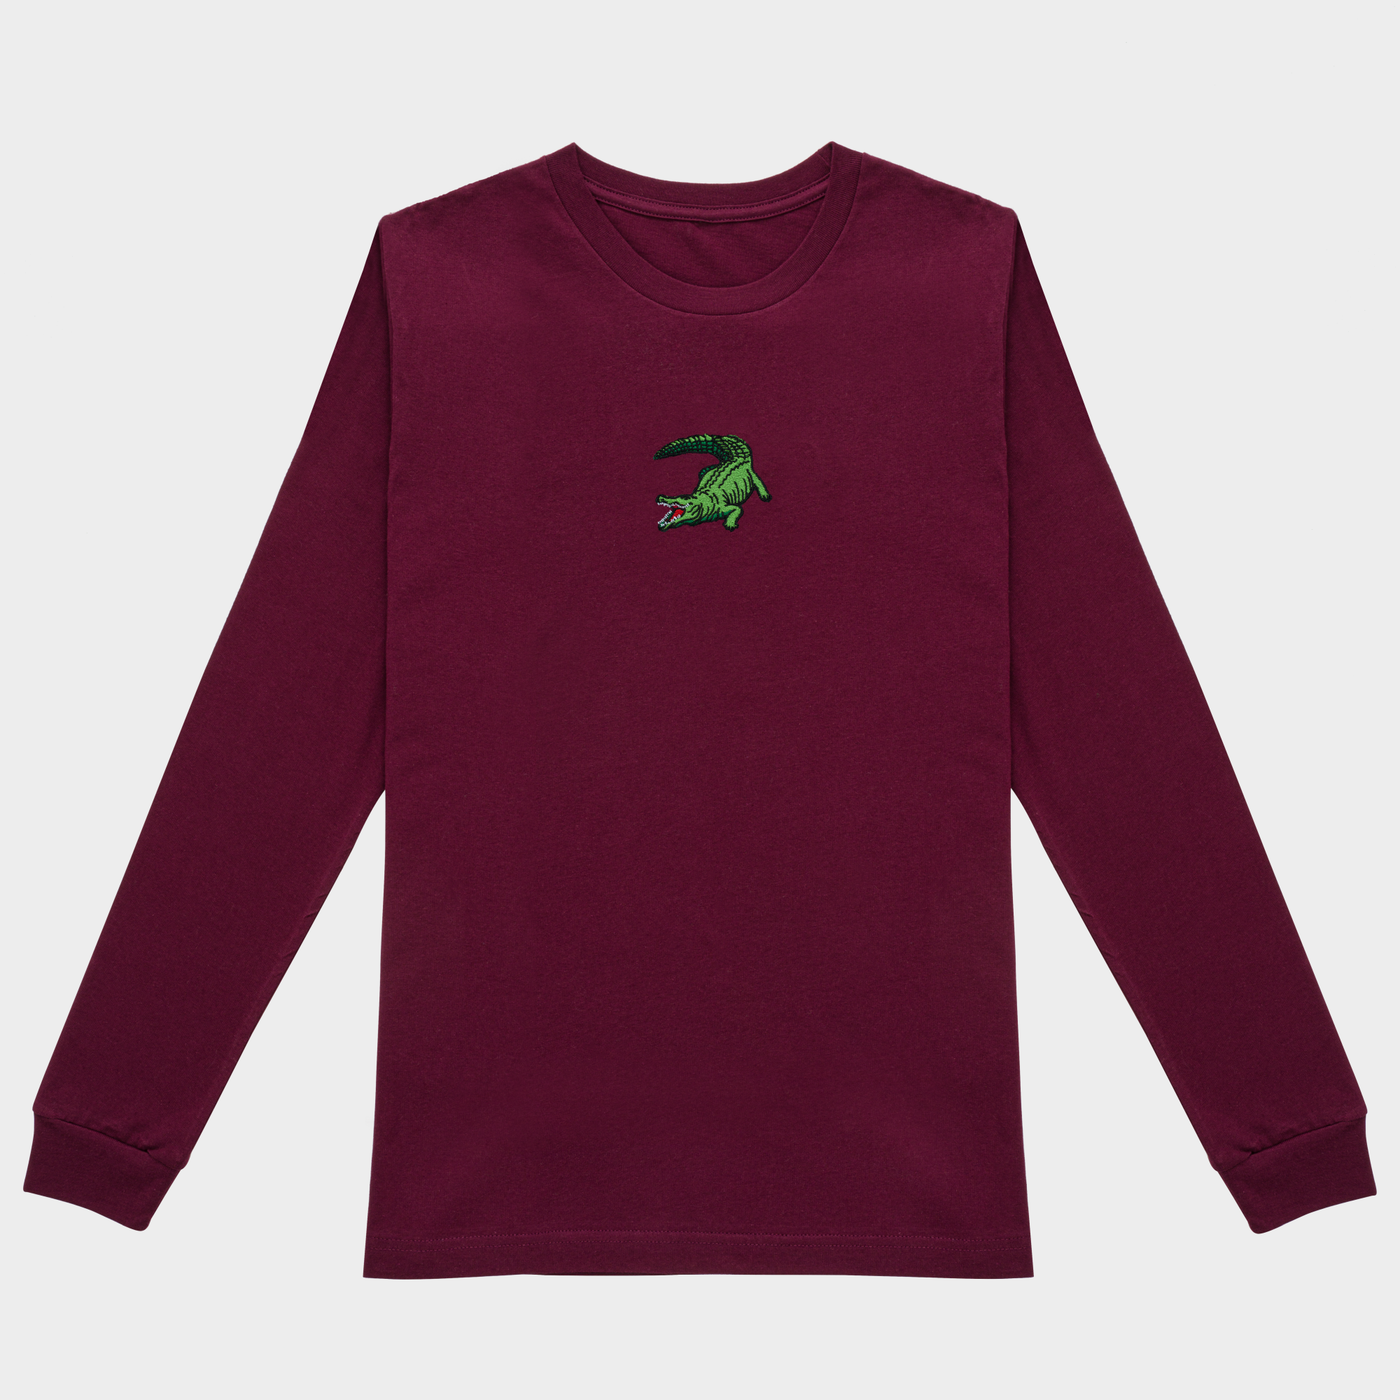 Bobby's Planet Men's Embroidered Saltwater Crocodile Long Sleeve Shirt from Australia Down Under Animals Collection in Maroon Color#color_maroon